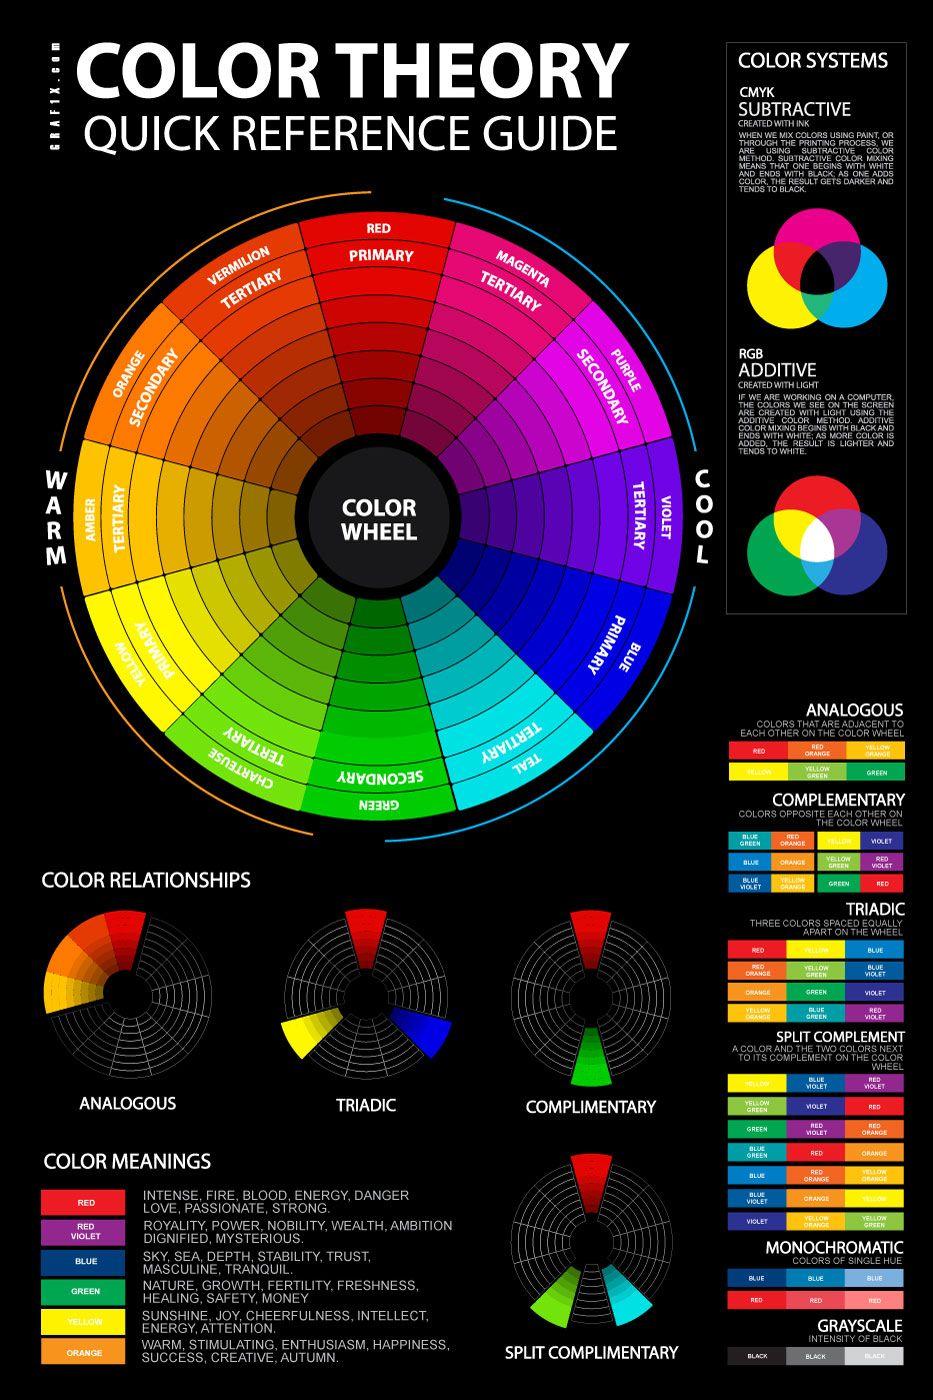 Yellow-Orange and Blue Logo - Color Meaning and Psychology of Red, Blue, Green, Yellow, Orange ...